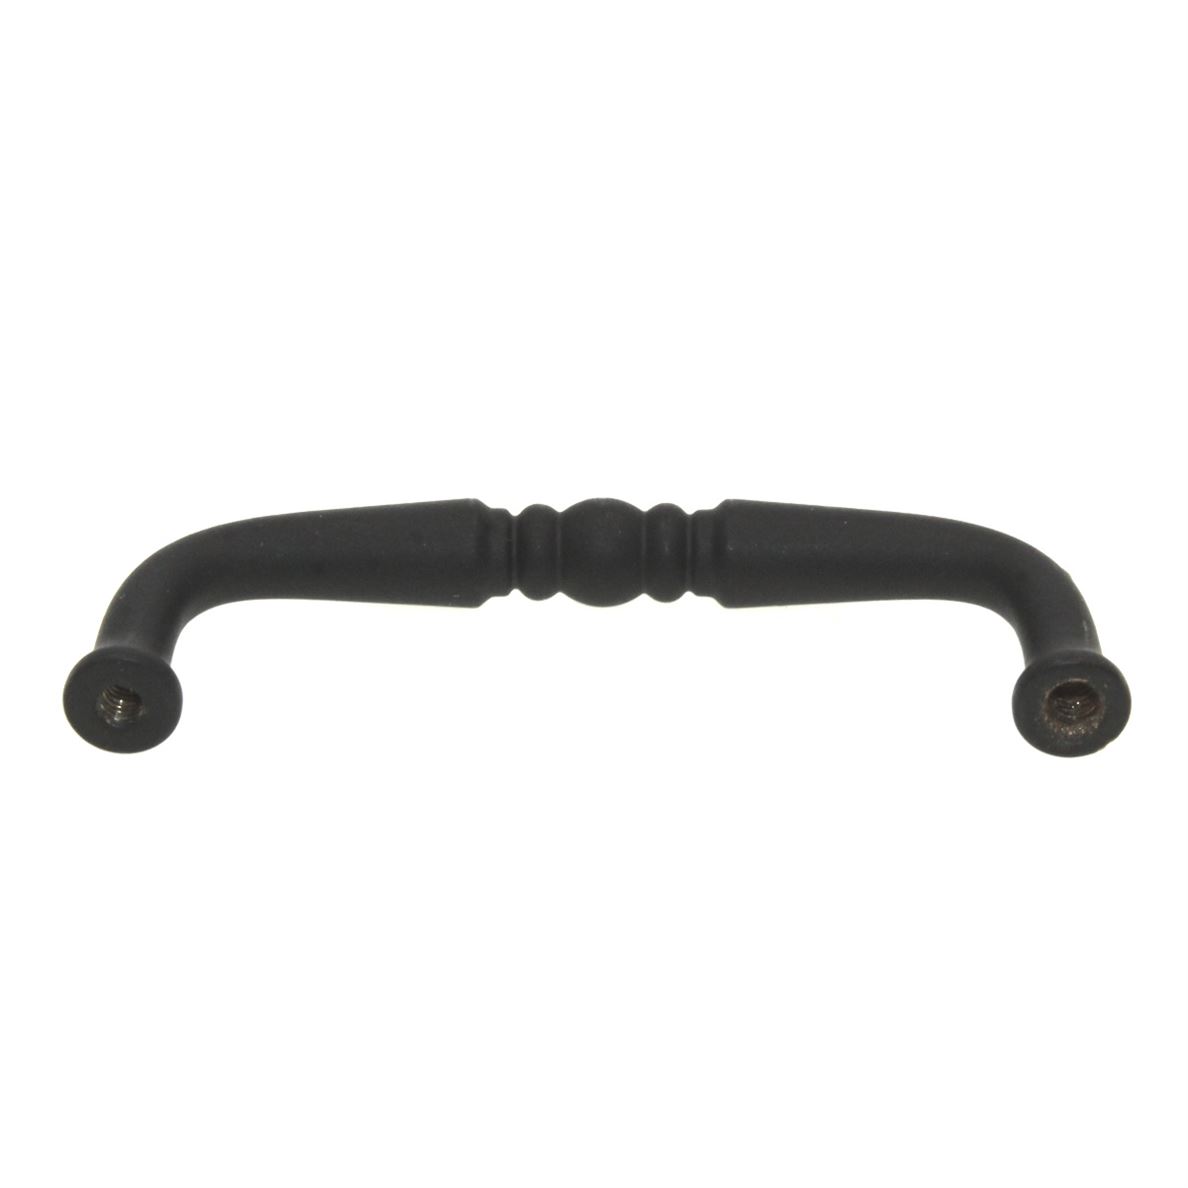 Keeler Power & Beauty Wrought Iron Black 3" Ctr. Cabinet Arch Pull Q769-19